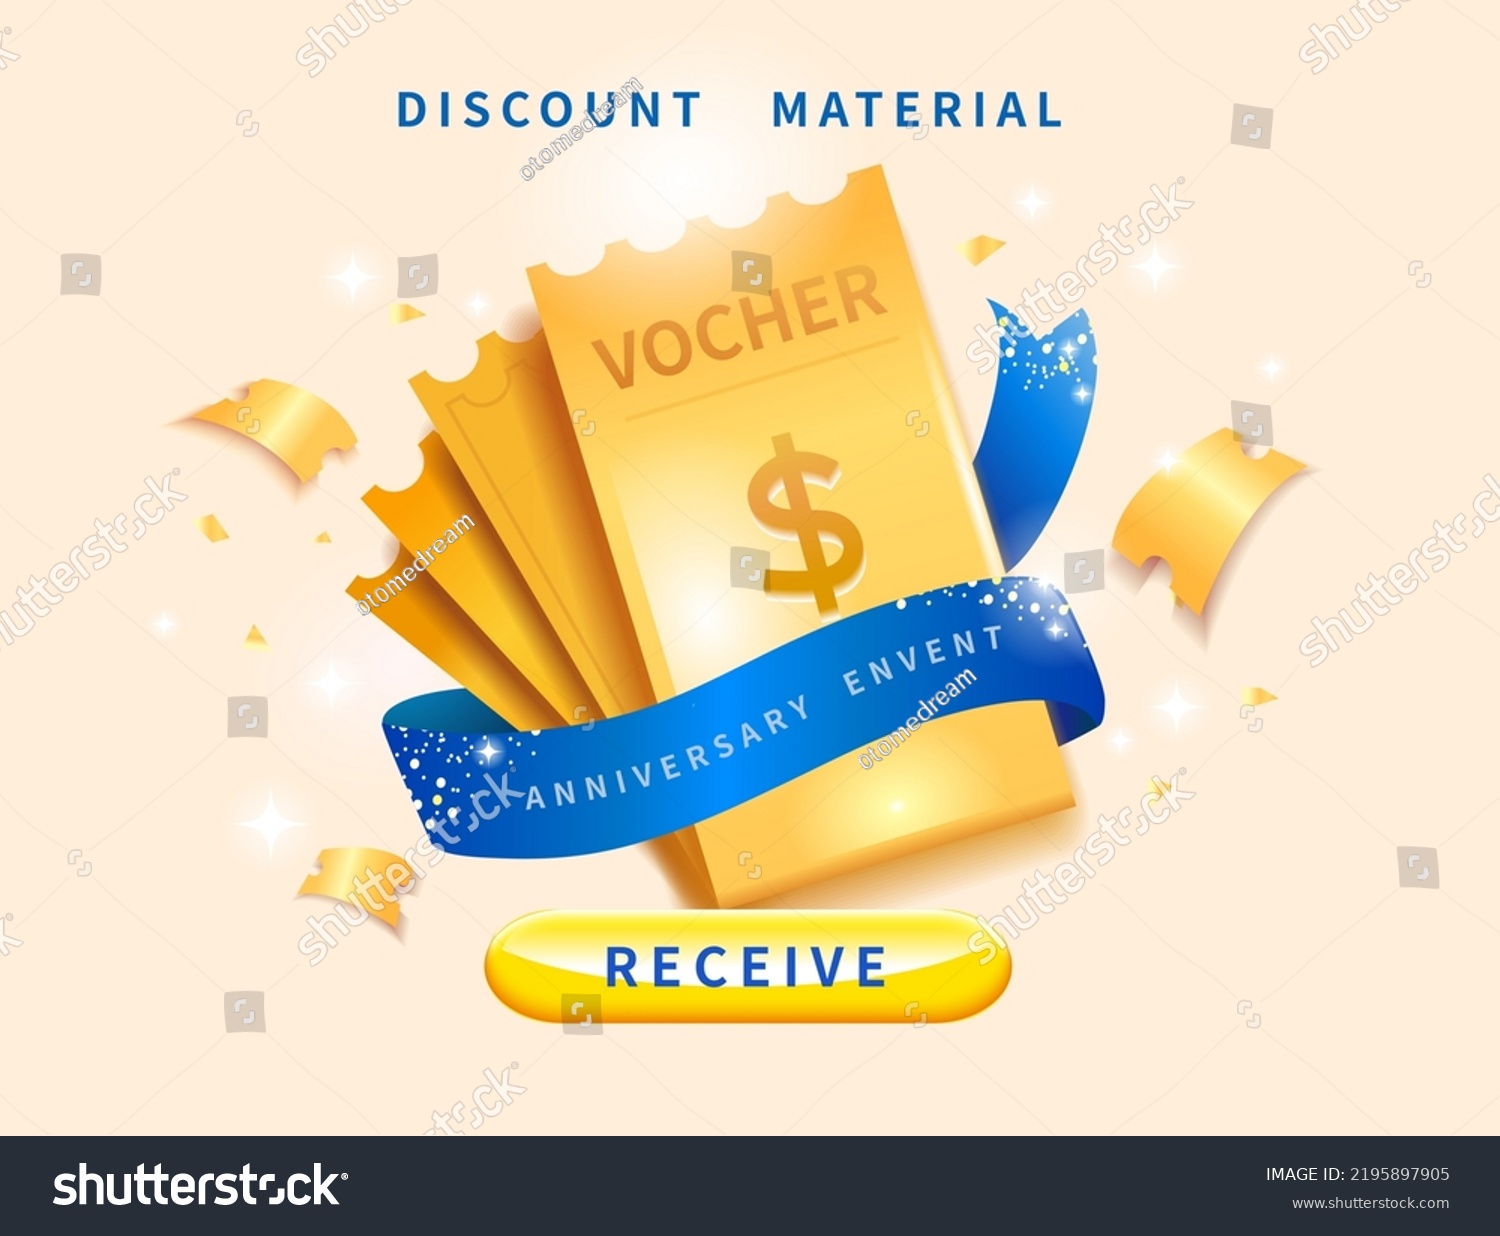 Premium luxury gift voucher template with golden voucher coupon wrapped in blue ribbon #2195897905